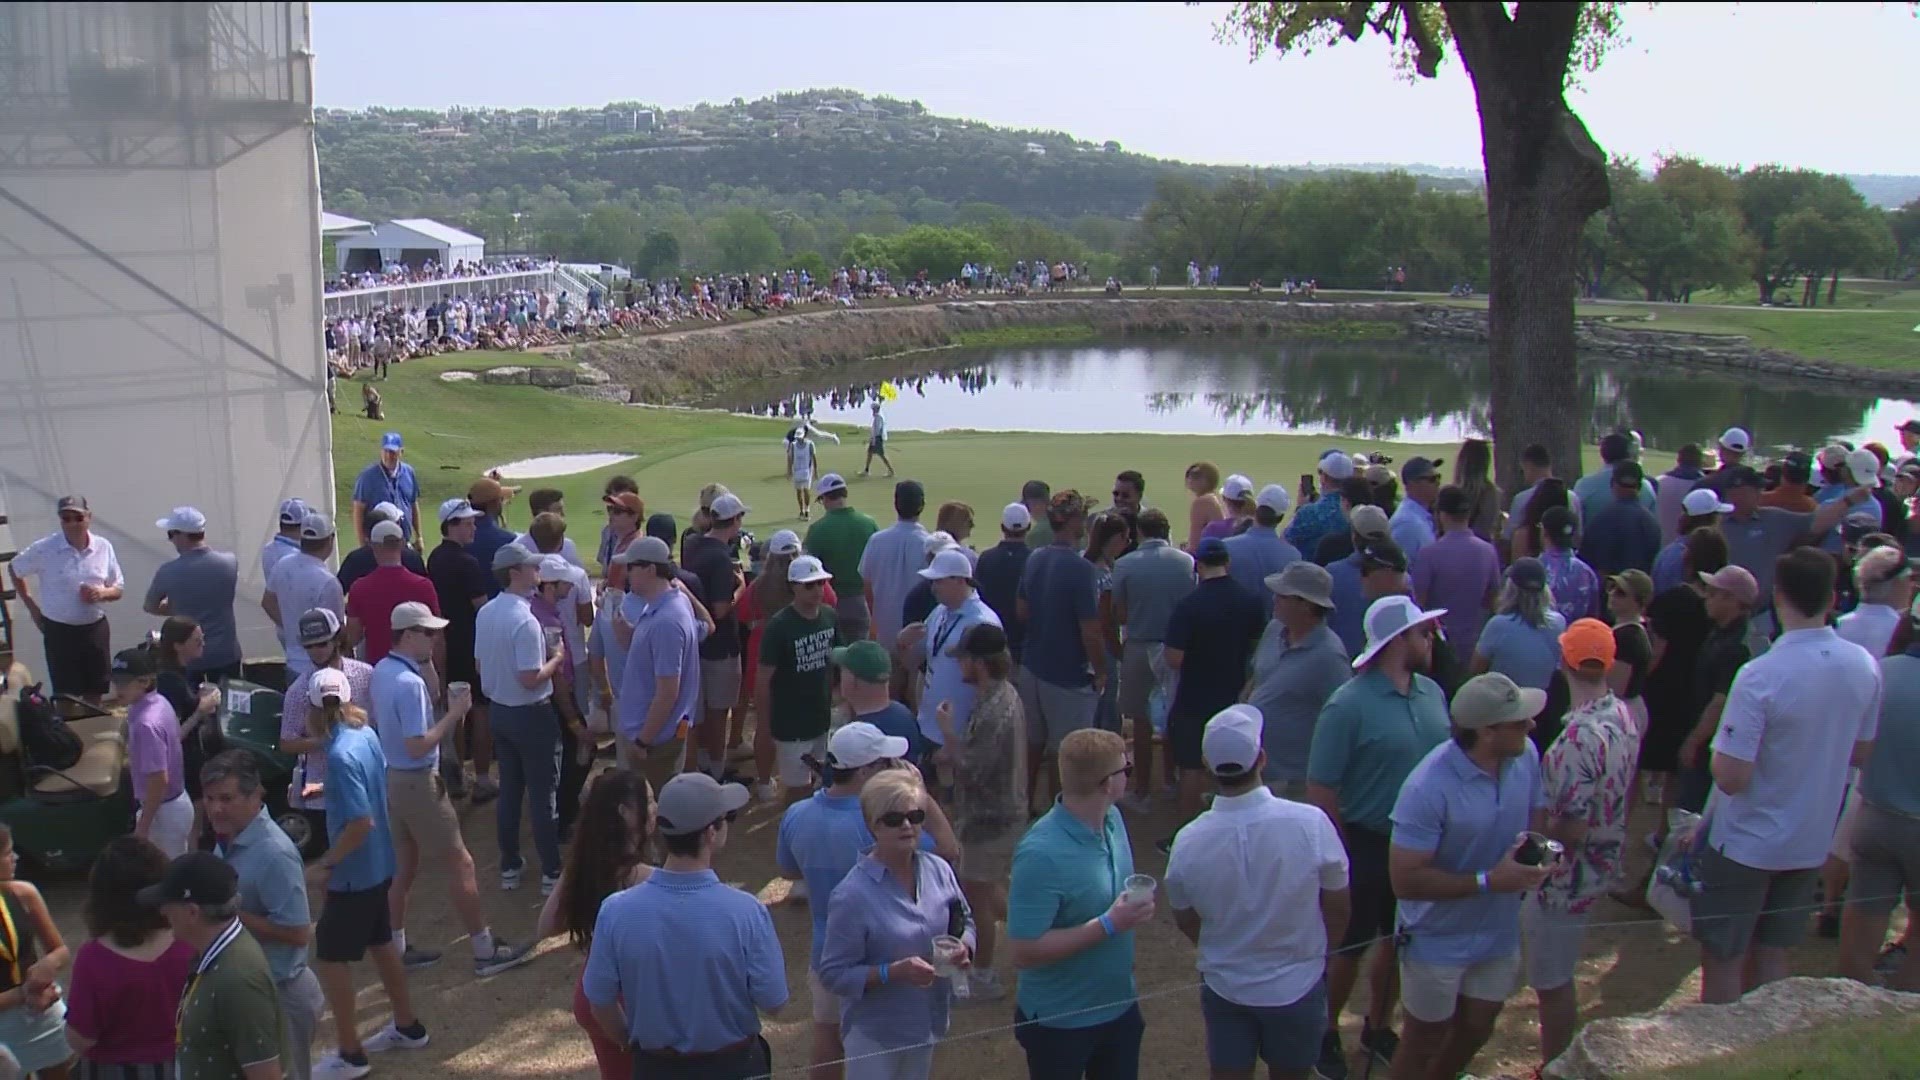 Golf fans pack the Austin Country Club for Dell Match Plays final day in Austin kvue